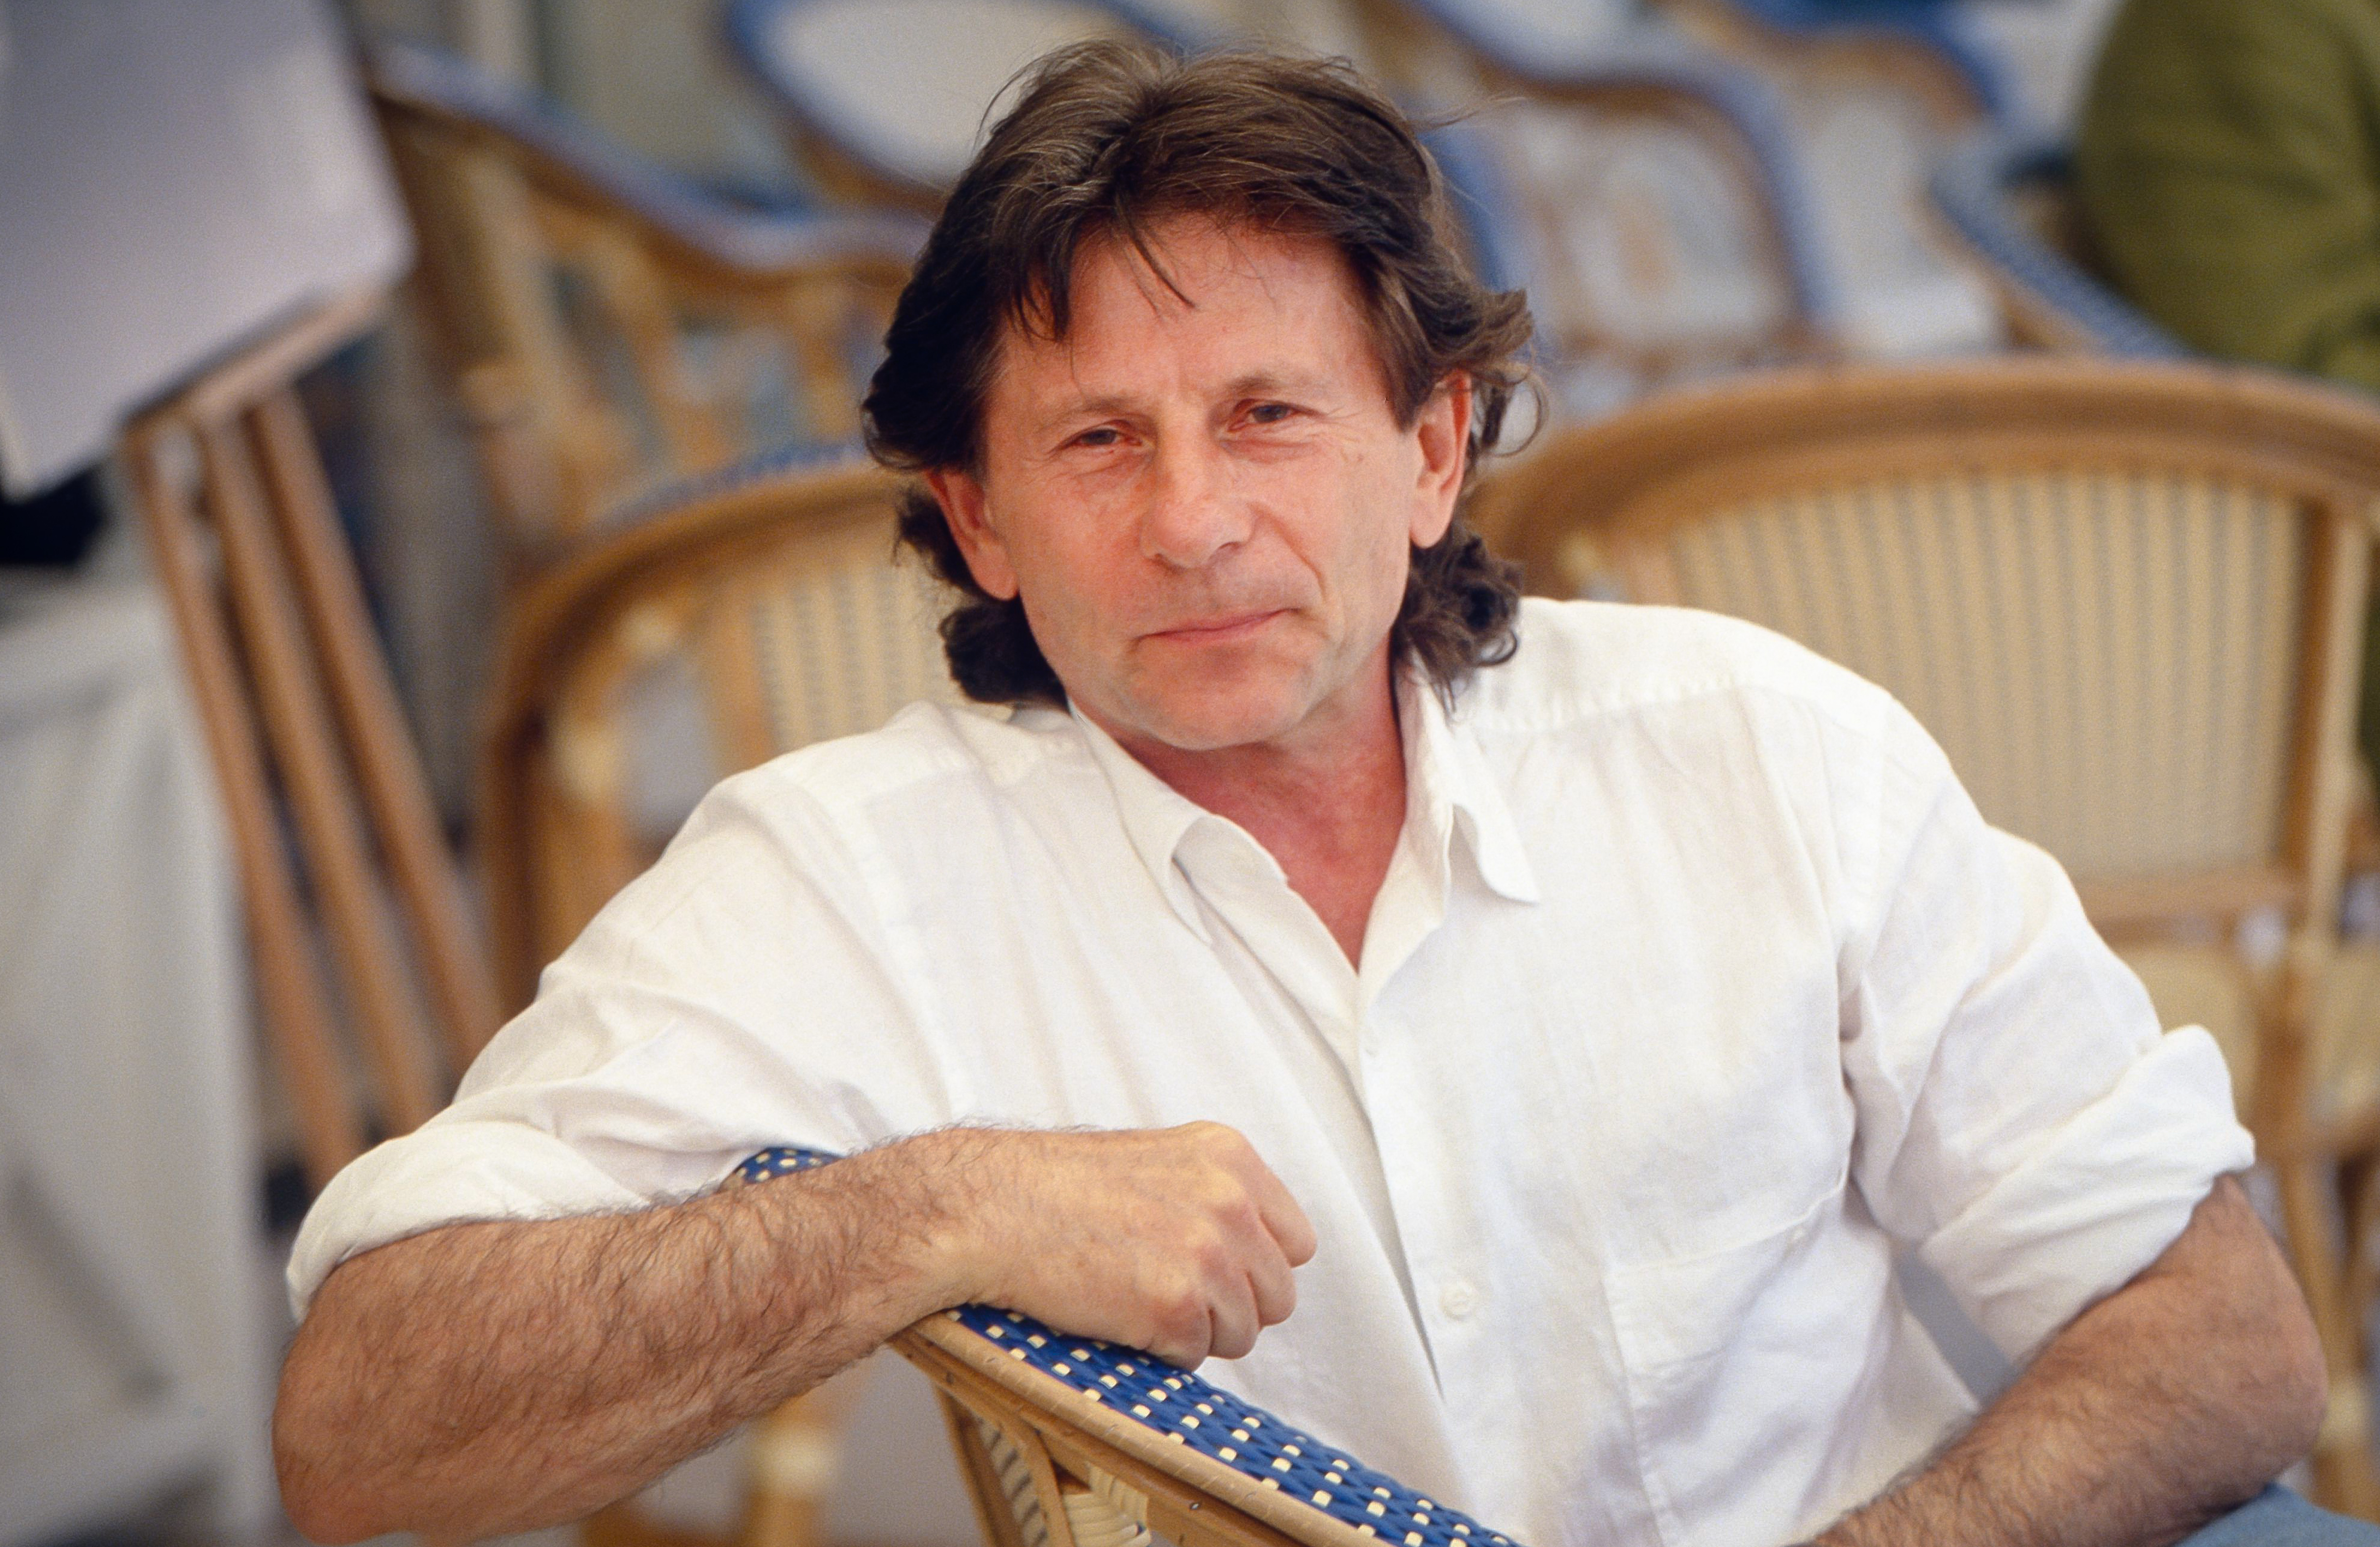 Roman Polanski at the "Death and the Maiden" photo call on May 1, 1994 in Cannes, France | Source: Getty Images